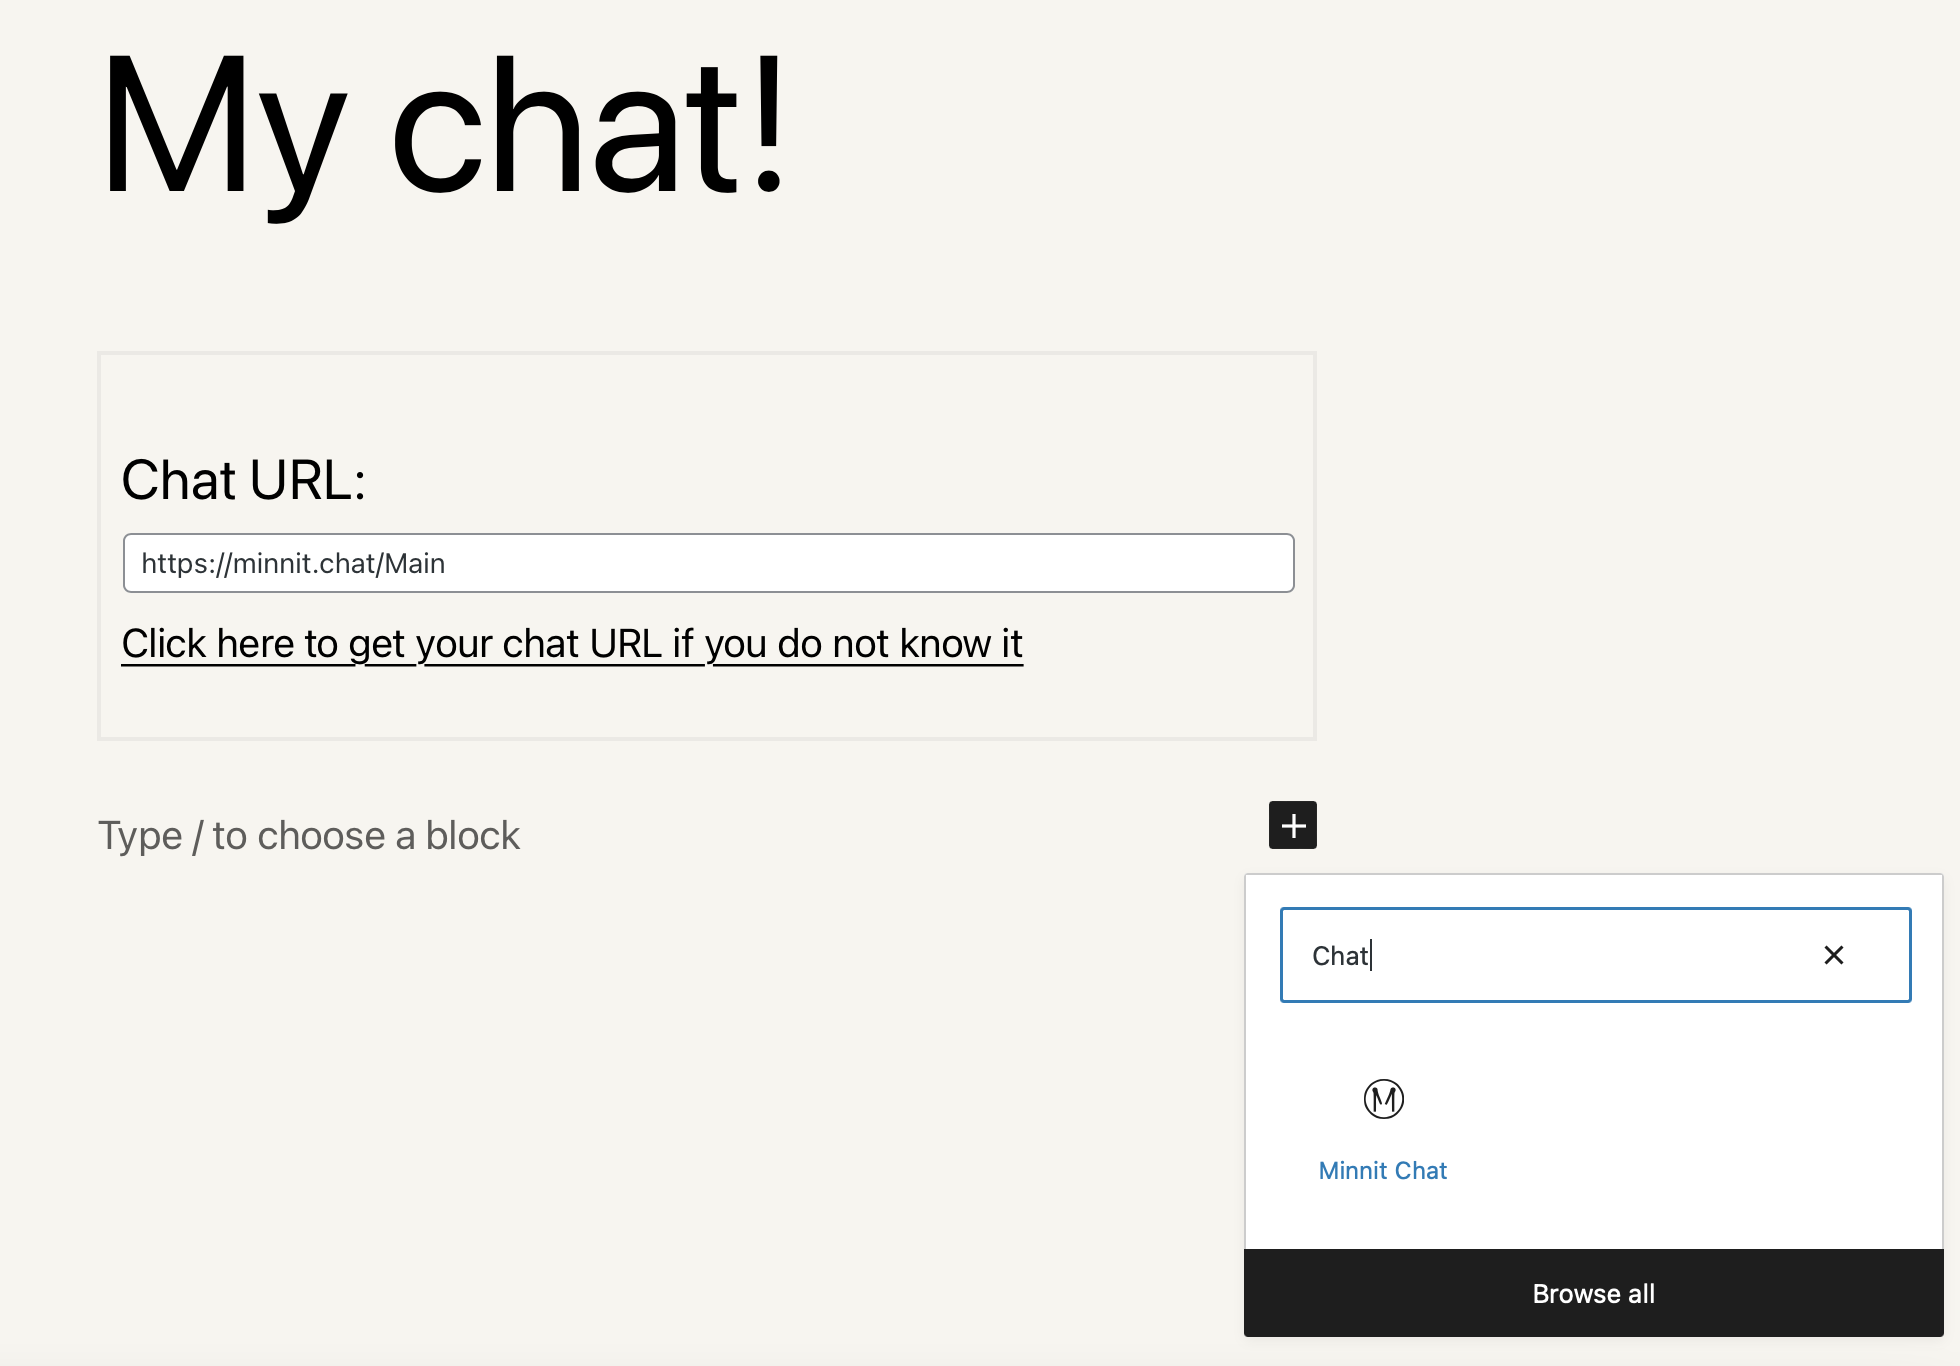 Adding a chatroom to a single post is a breeze. Simply add the "Minnit Chat" block, enter your chat URL, and you're all set.